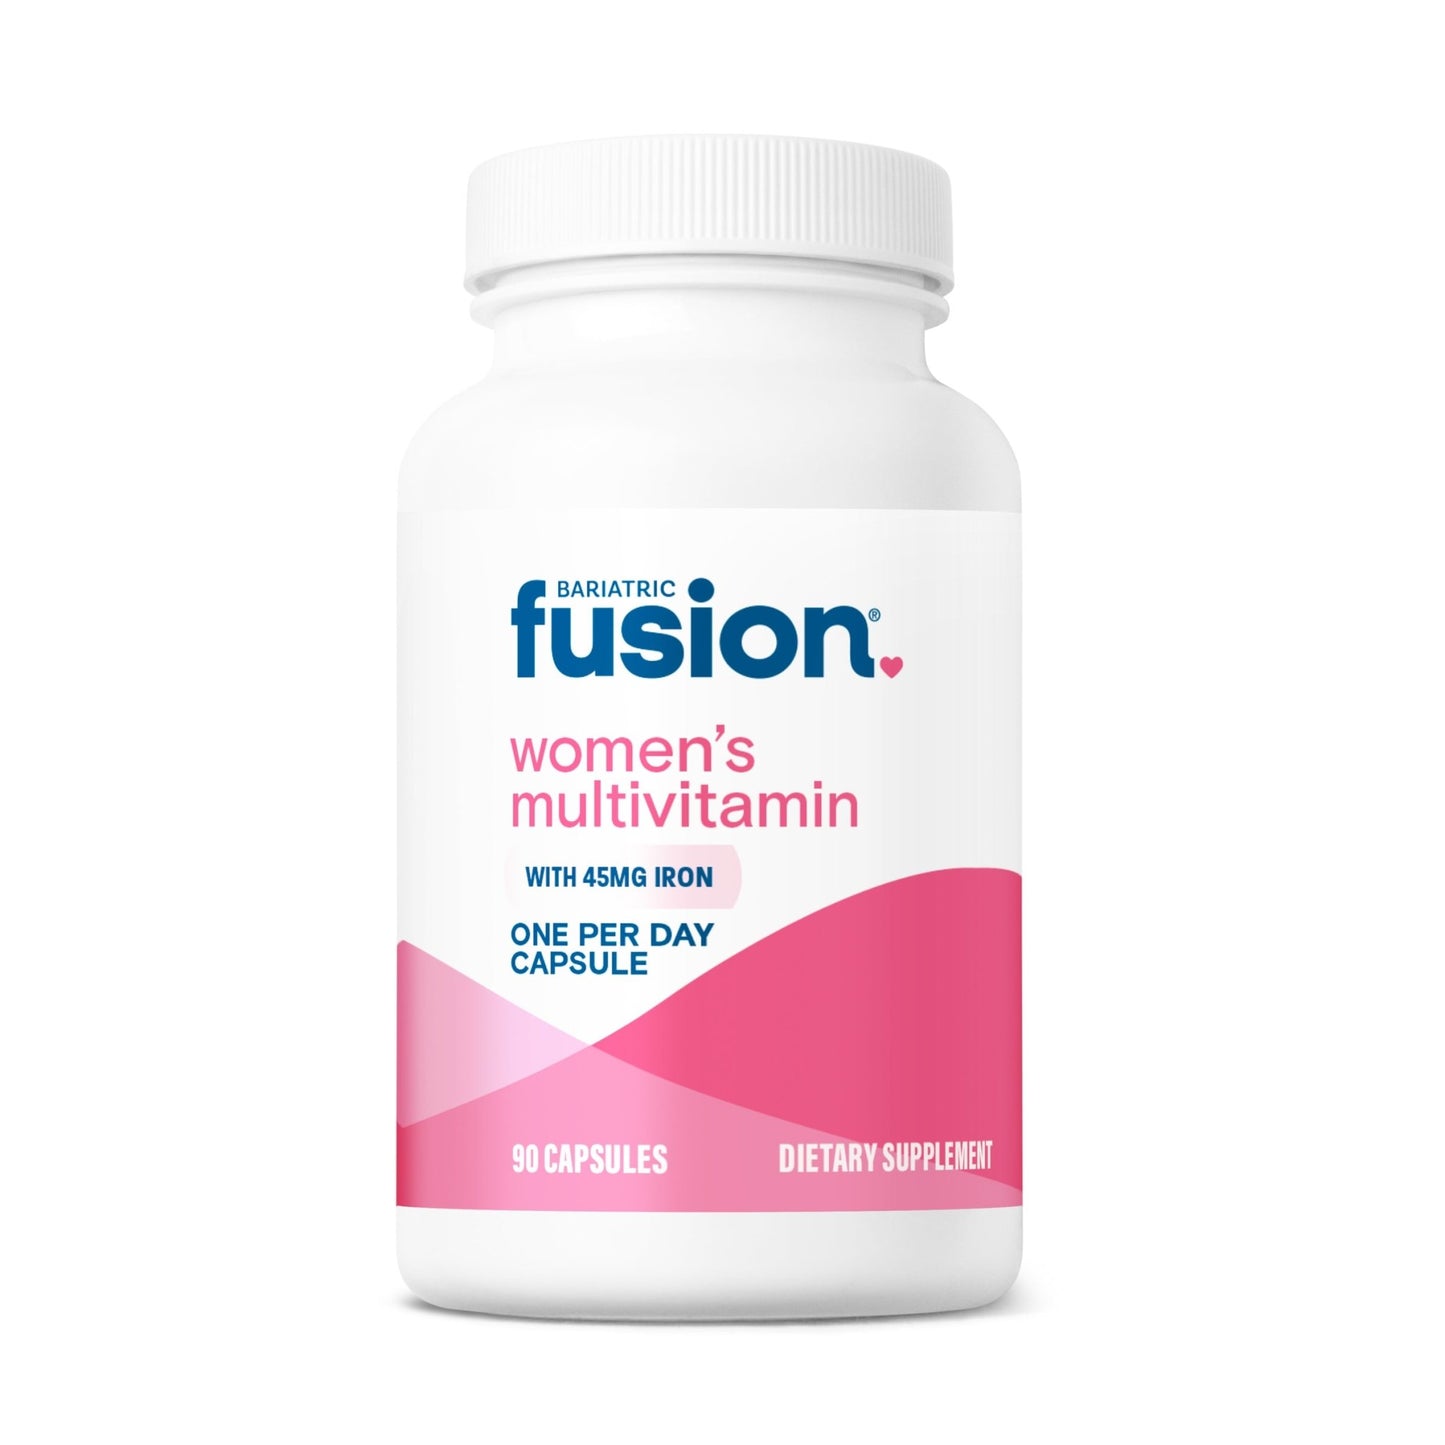 Women’s One Per Day Multivitamin With Iron 90 capsules.